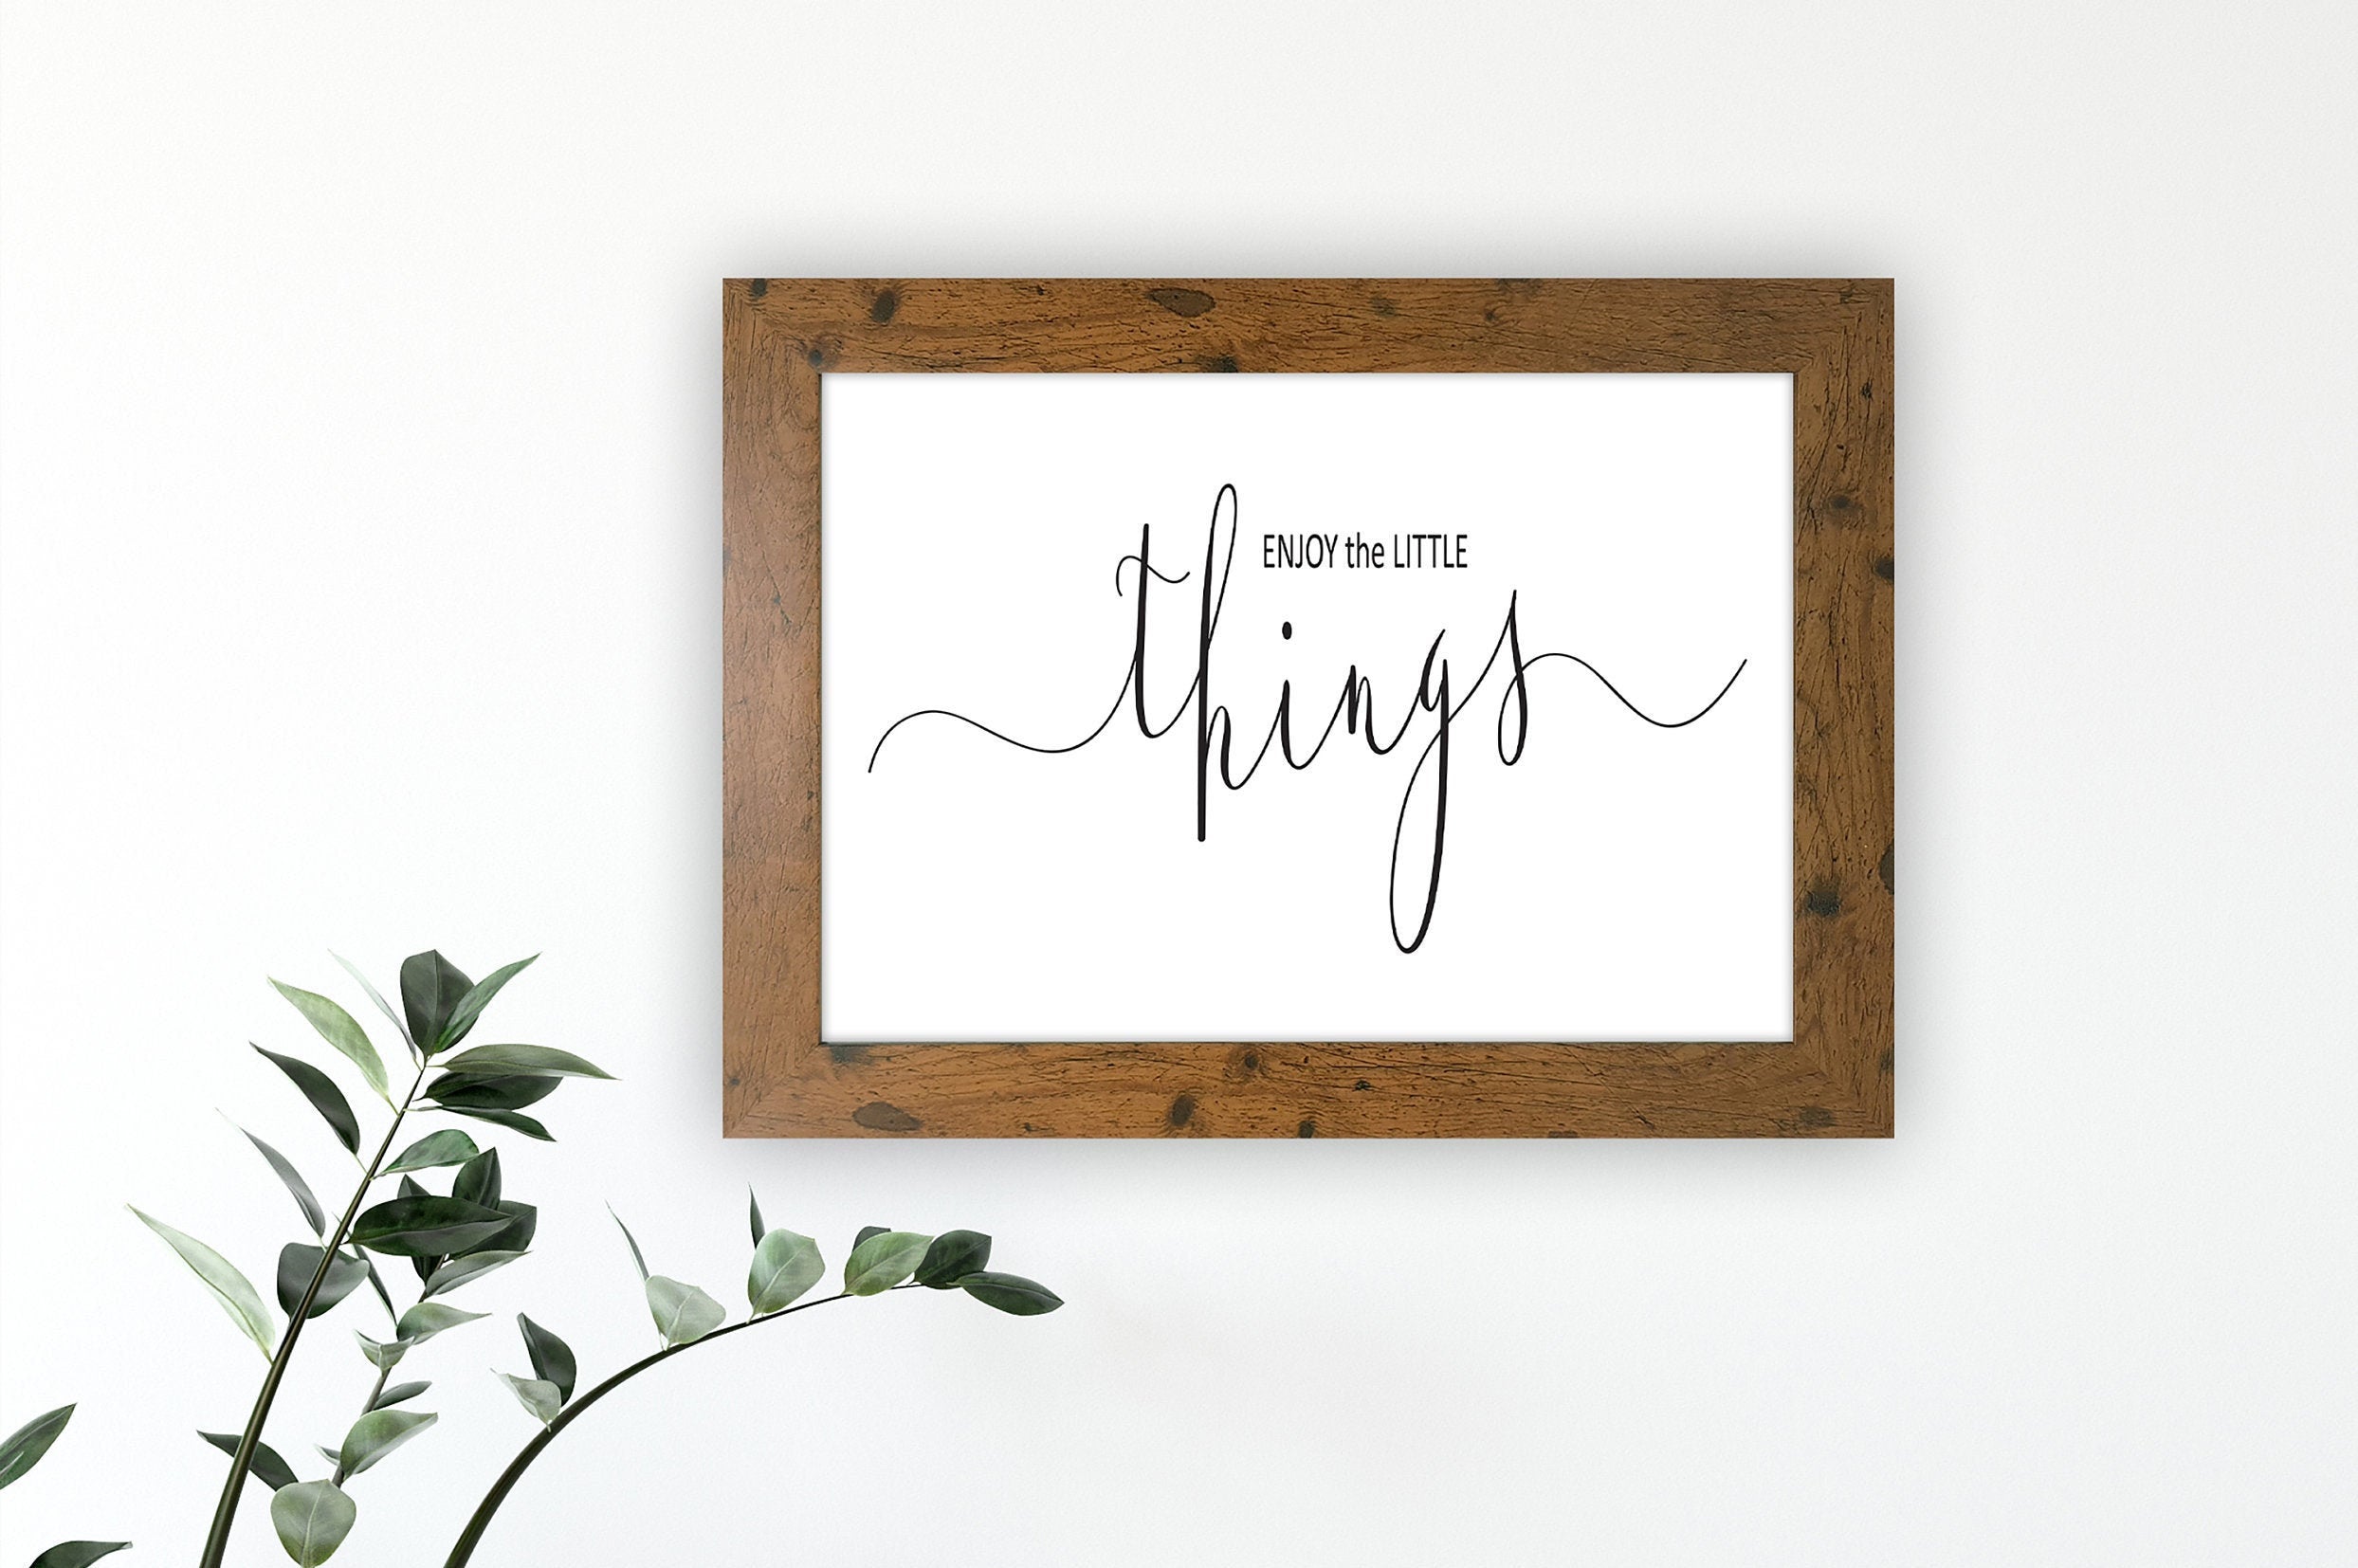 30 X 40 Oxford Photo Frame with Enjoy the Little things Print